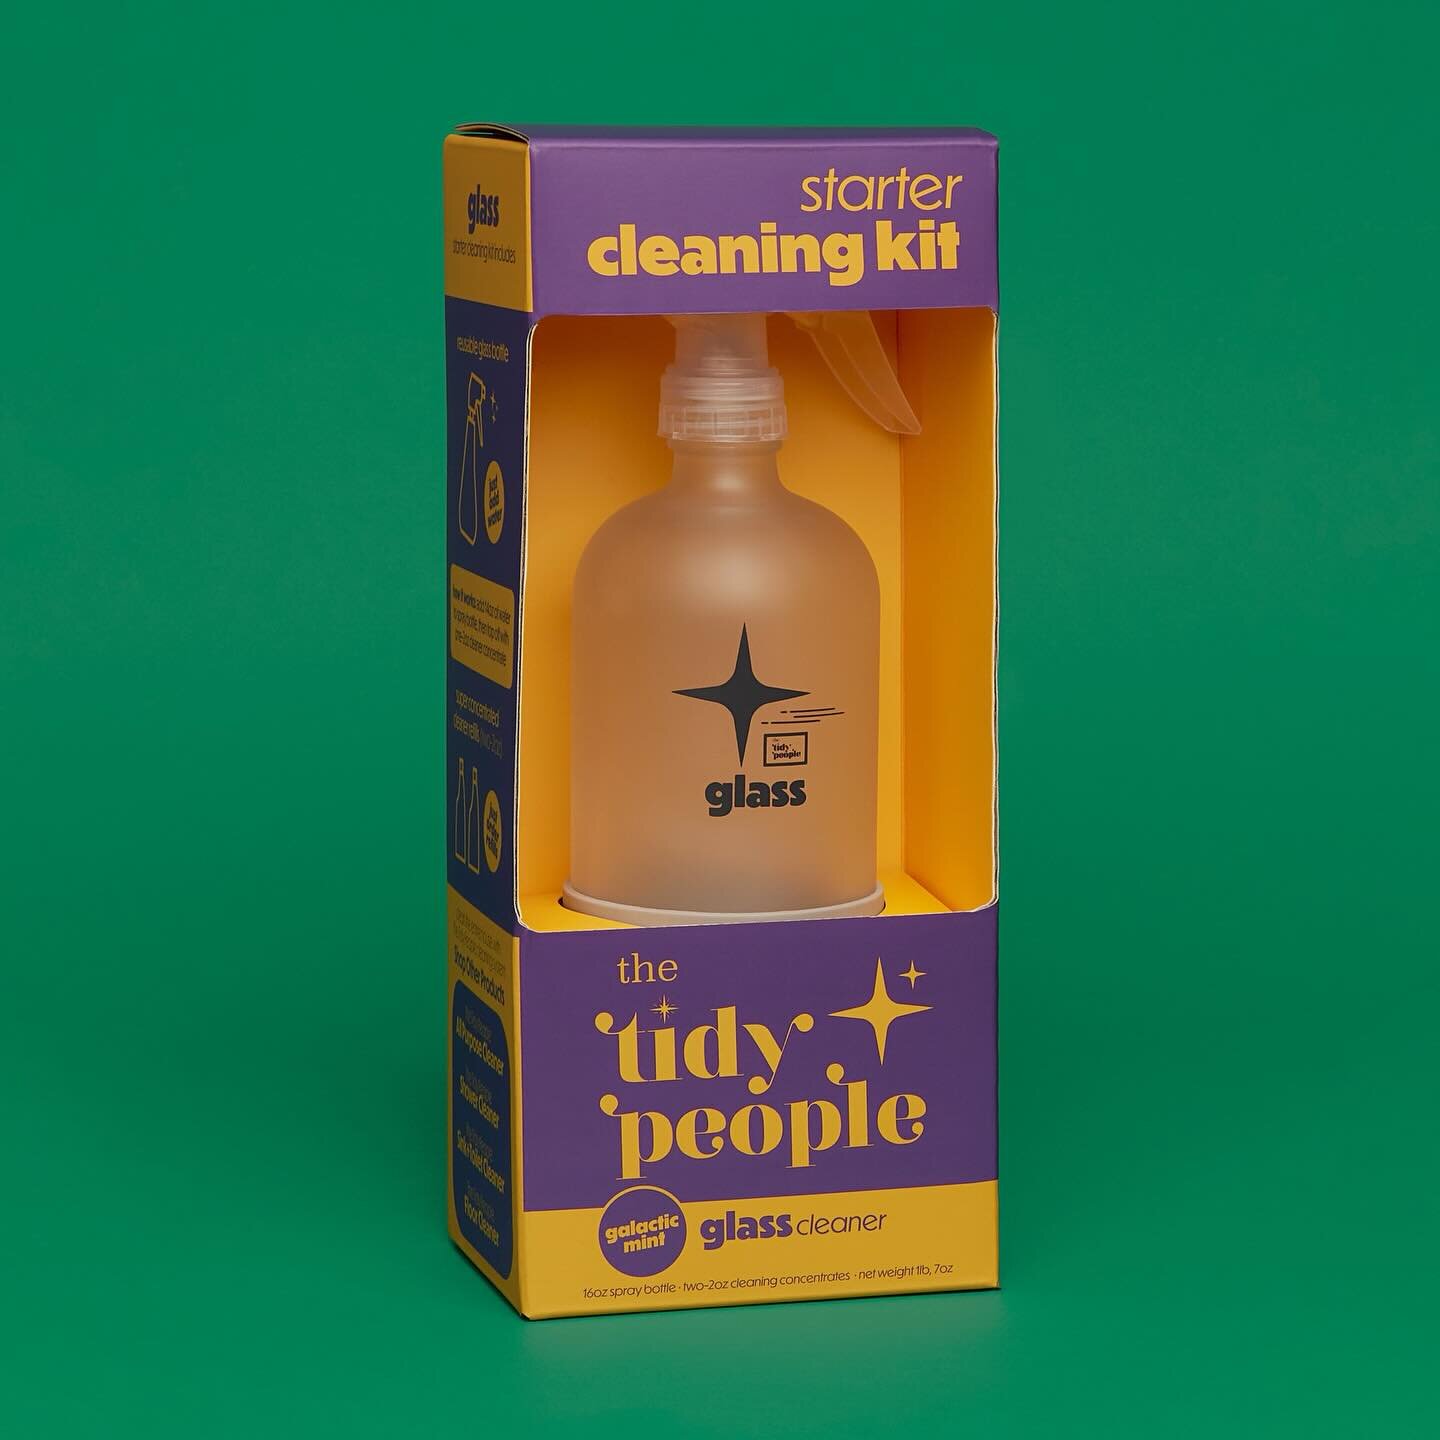 Ever use an eco friendly glass cleaner that streaks? We know 🙄 This glass cleaner by The Tidy People is non-toxic and 𝘢𝘤𝘵𝘶𝘢𝘭𝘭𝘺 works ✨ Here&rsquo;s to streak free bliss 💫

We are the FIRST and only cleaning product line that teaches people 